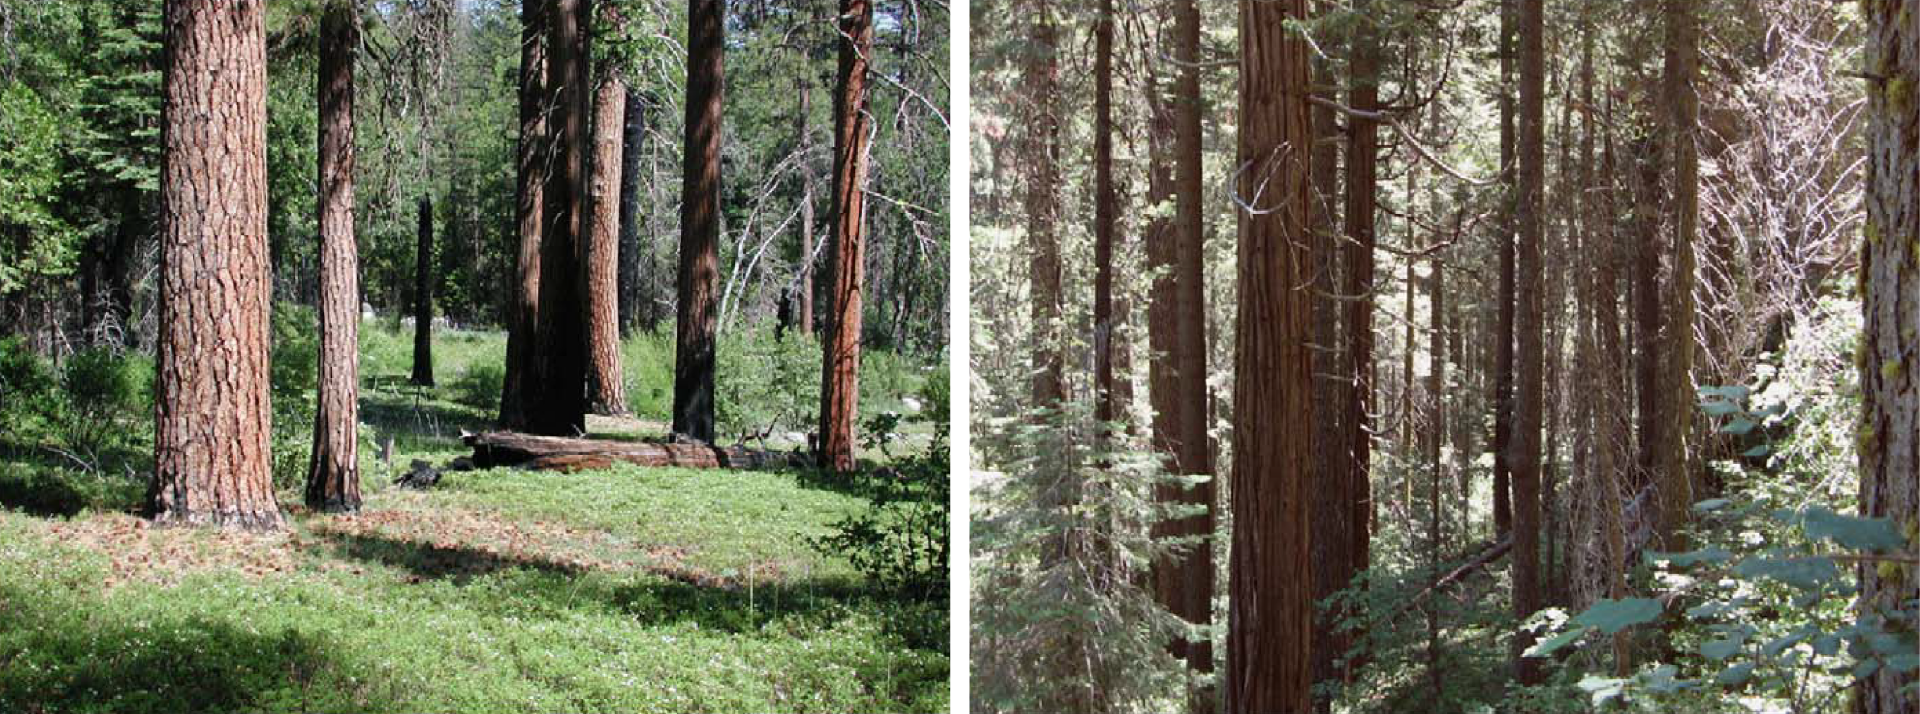 Two images show a denser forest in a fire-suppressed area, and a more open forest in an area that has experienced fire.